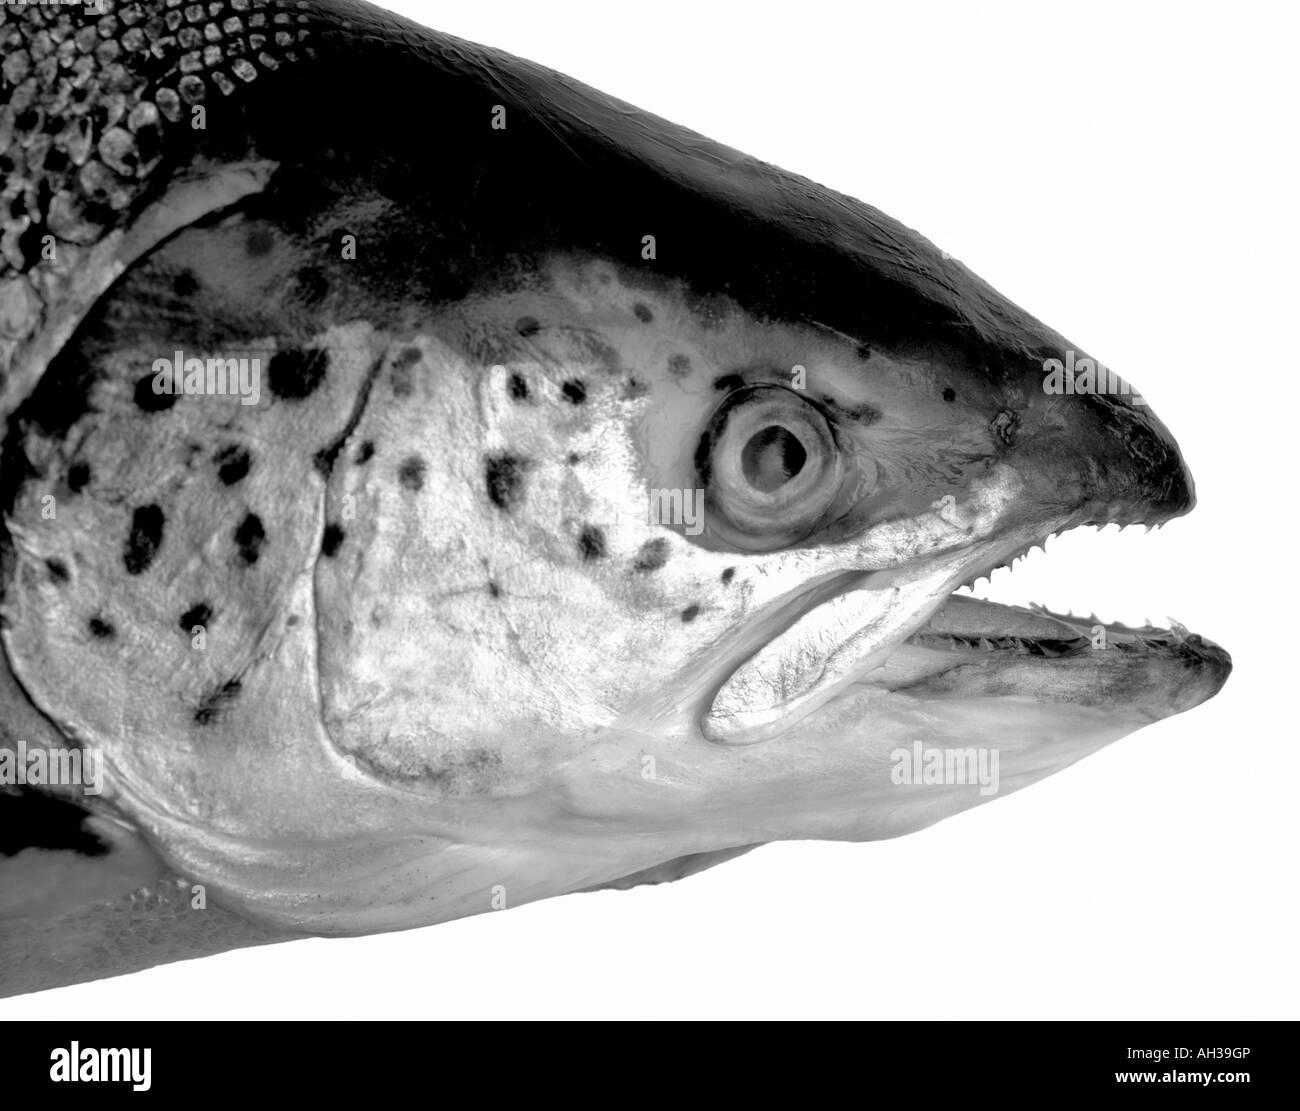 Closeup of part of a Salmon on a white background Stock Photo